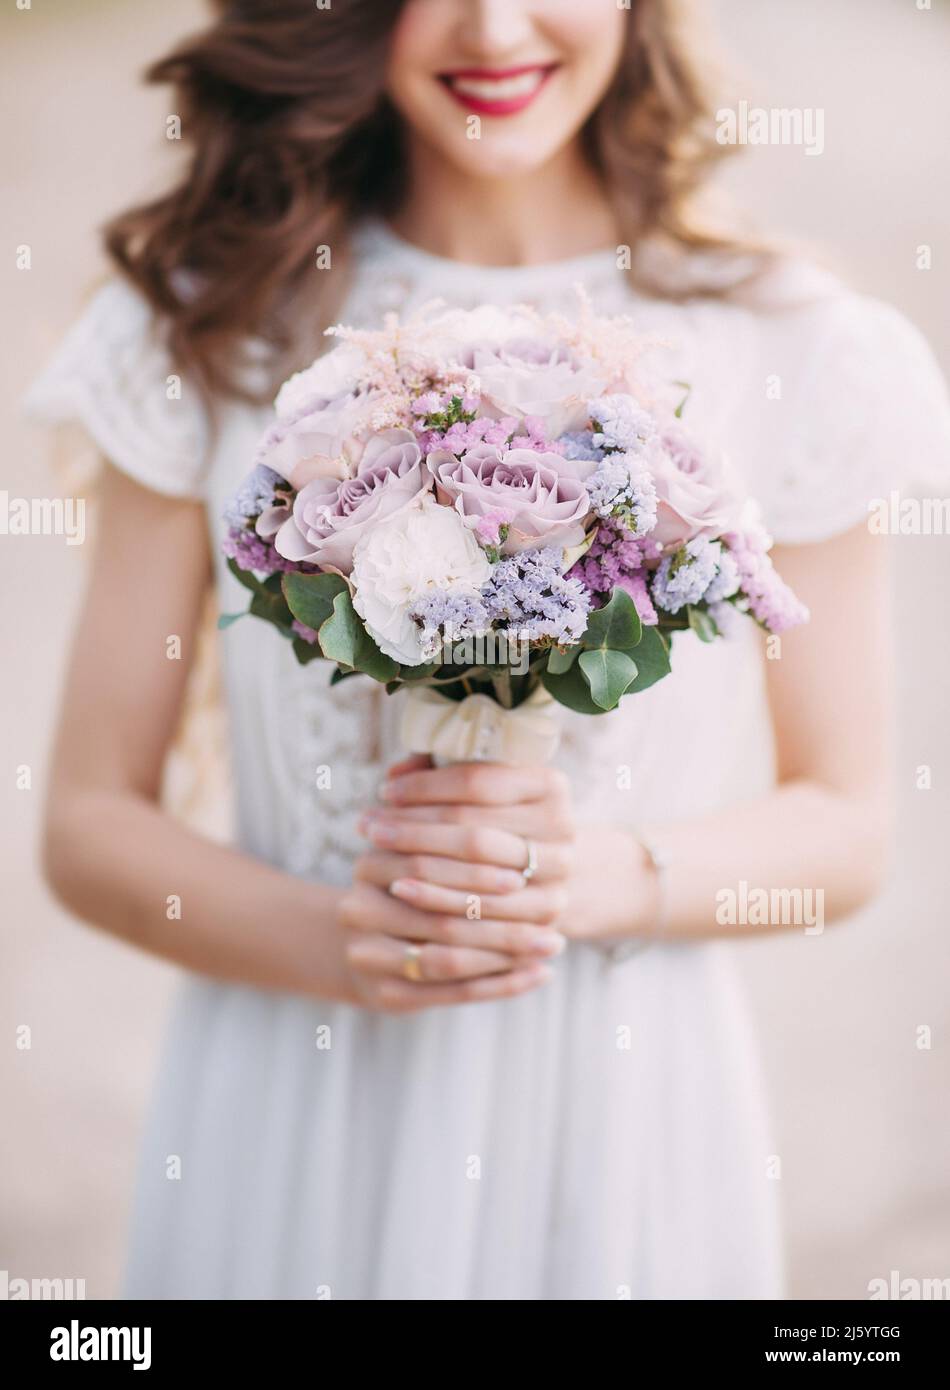 Wedding bouquet in white and violet colours, close up. Modest beautiful smiling bride with round purple wedding bouquet. White lace and silk wedding d Stock Photo